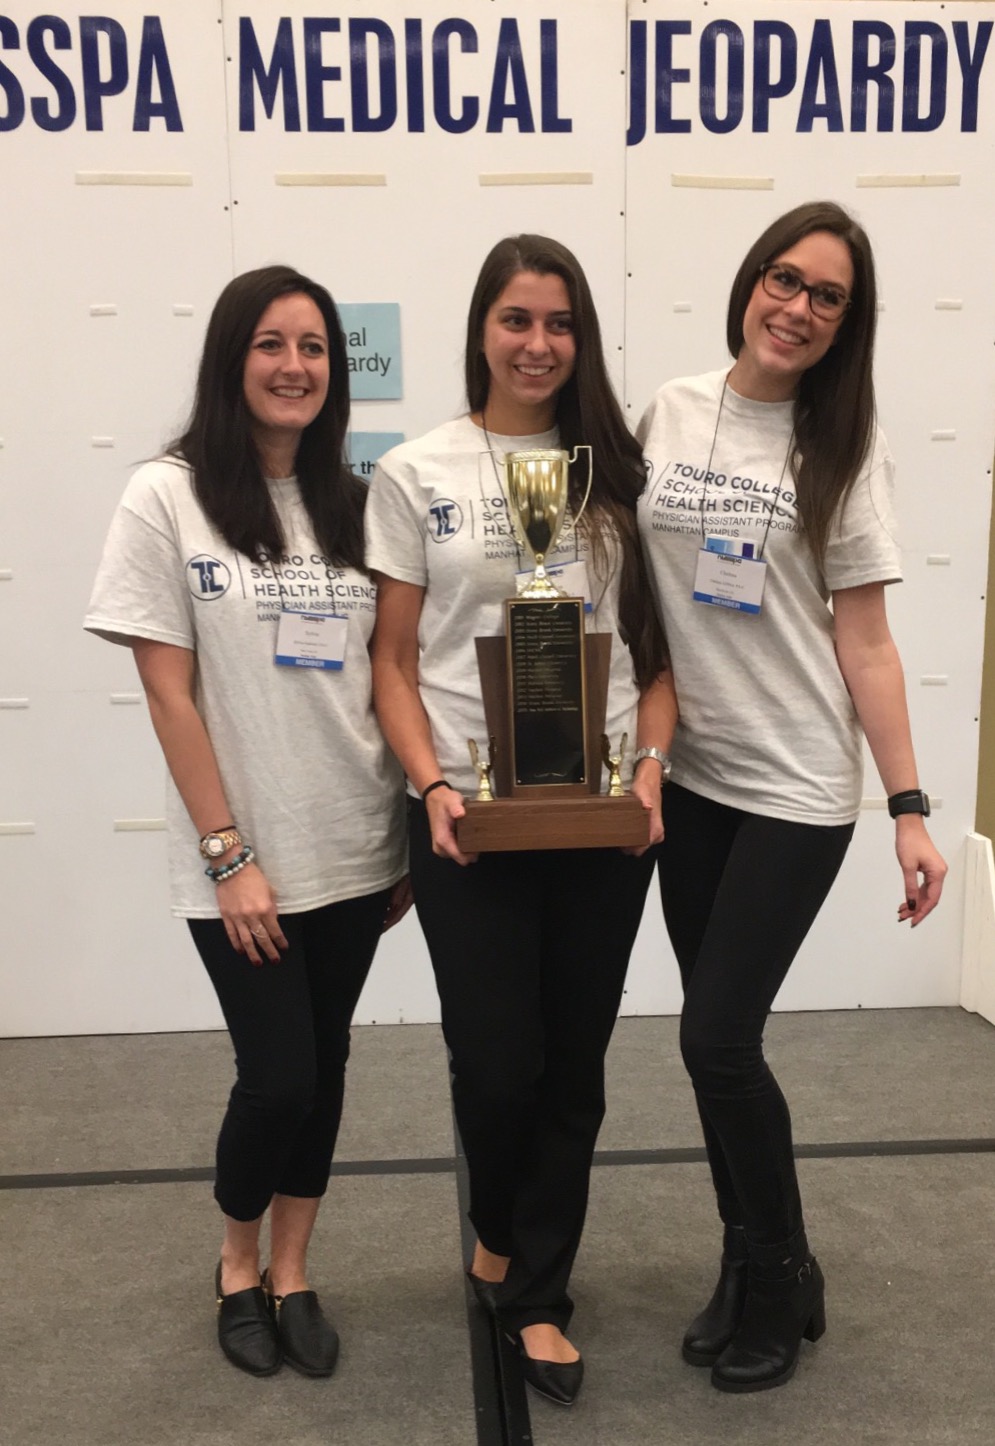 Students Sylvia Grabicki, Laryssa Llanio, and Chelsea Gifford holding their trophy from the Medical Challenge Bowl.